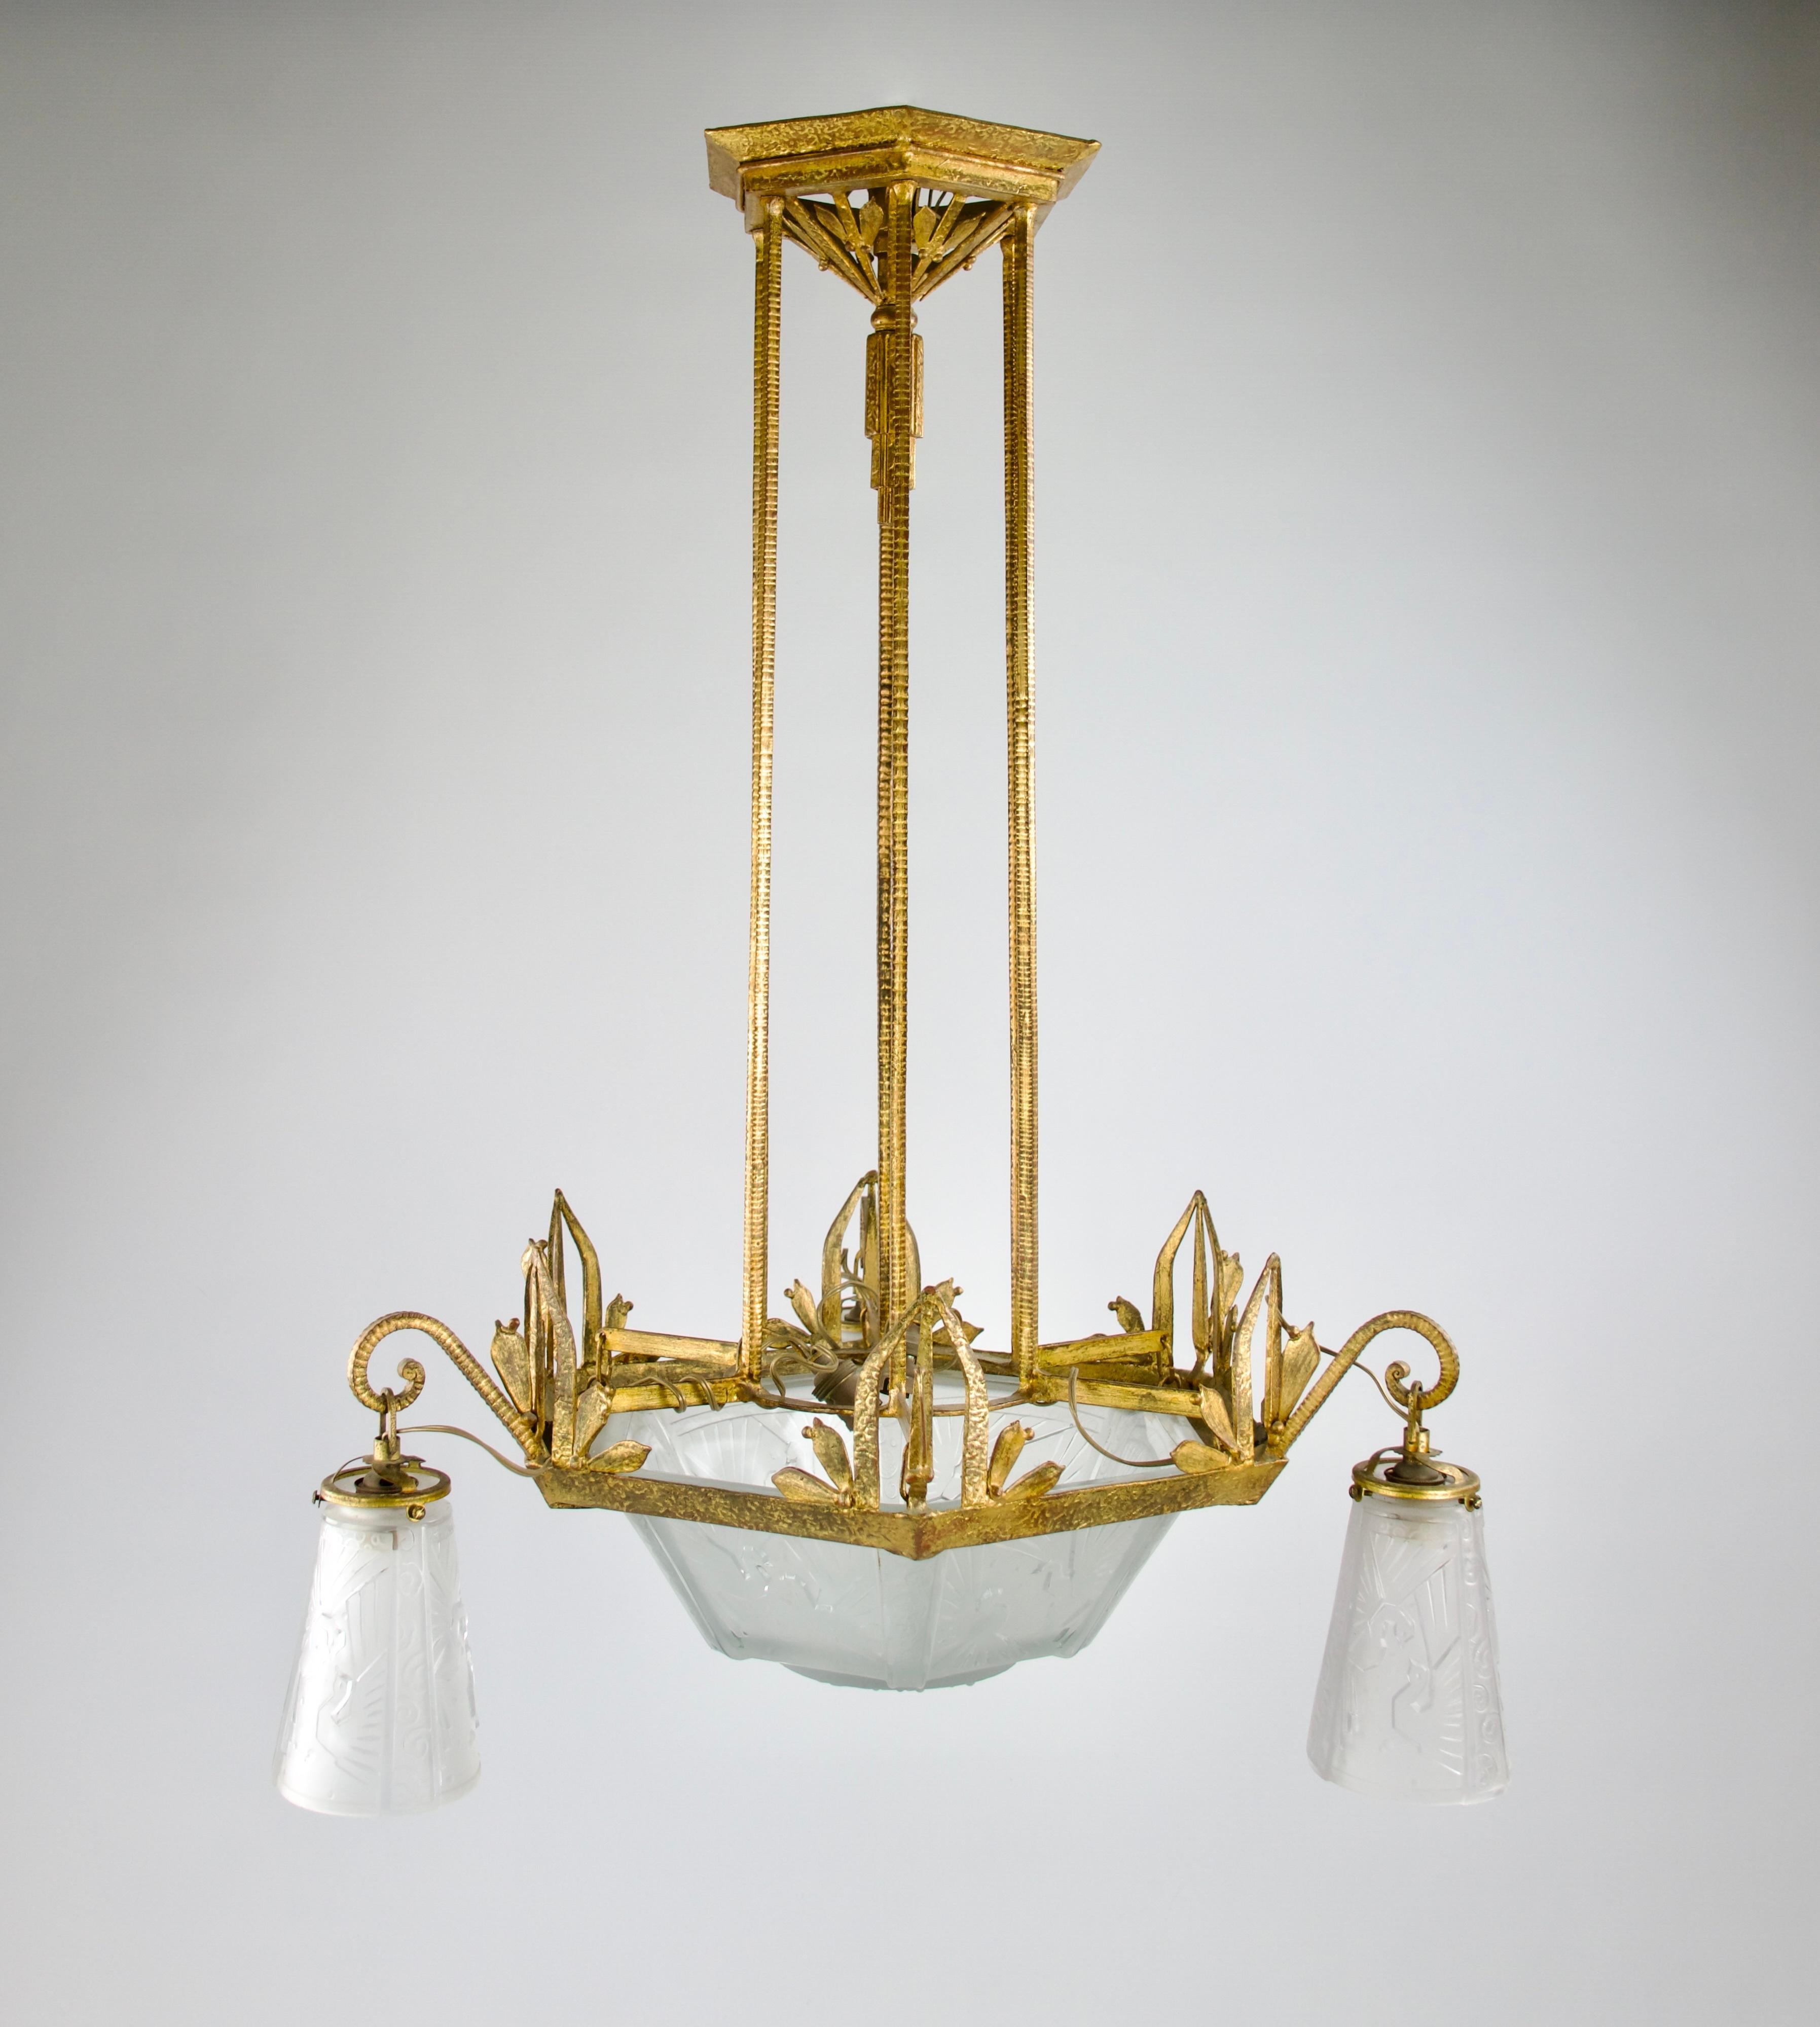 Beautiful gilt framed and peacock motif Muller Frères chandelier from the French Art Deco period.

In good condition.

Dimensions in cm ( H x D ) : 82 x 56

Secure shipping.